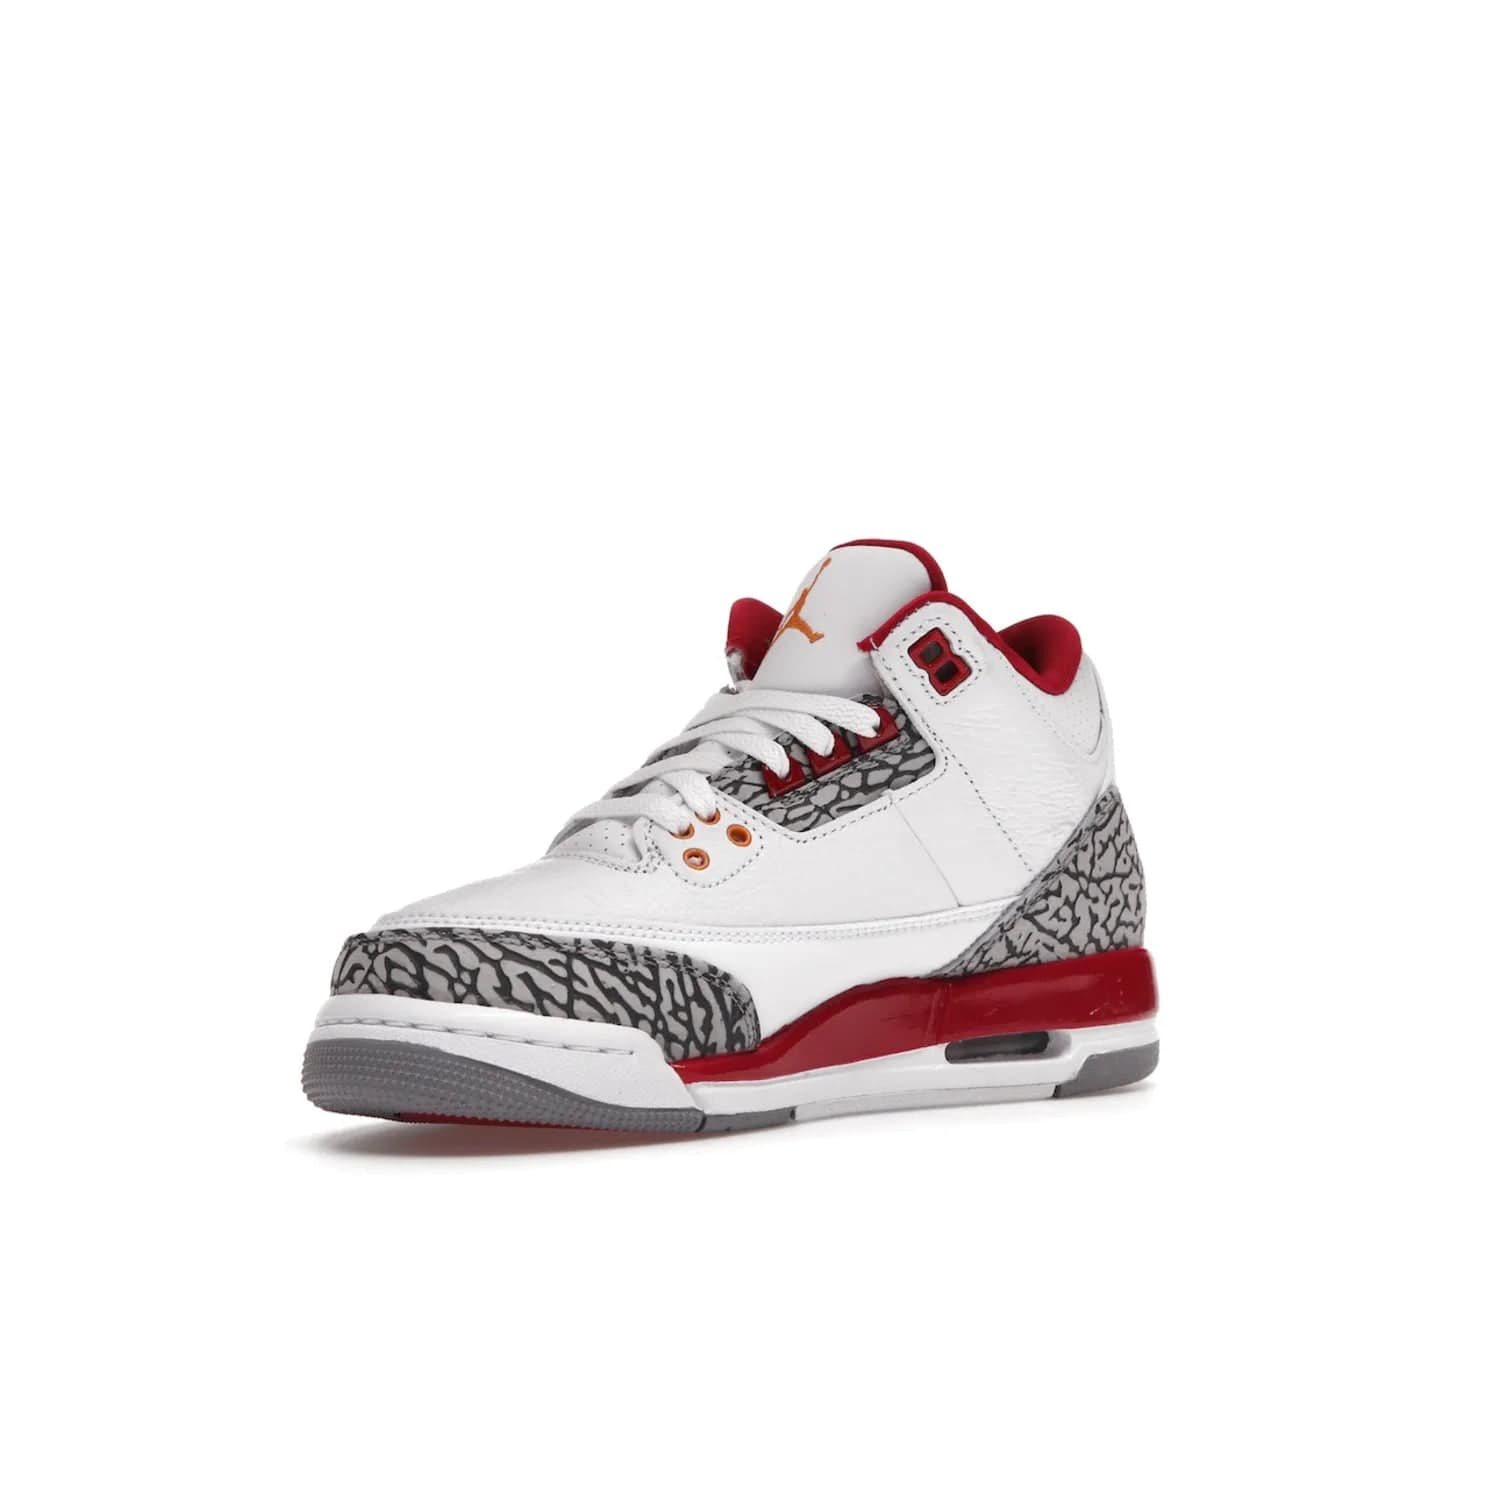 Jordan 3 Retro Cardinal (GS) - Image 15 - Only at www.BallersClubKickz.com - Shop the kid-sized Air Jordan 3 Retro Cardinal GS, released Feb 2022. White tumbled leather upper, light curry accenting, cement grey and classic red details throughout. Visible Air cushioning, midsole, and an eye-catching outsole. Show off your style with this fashionable streetwear silhouette.